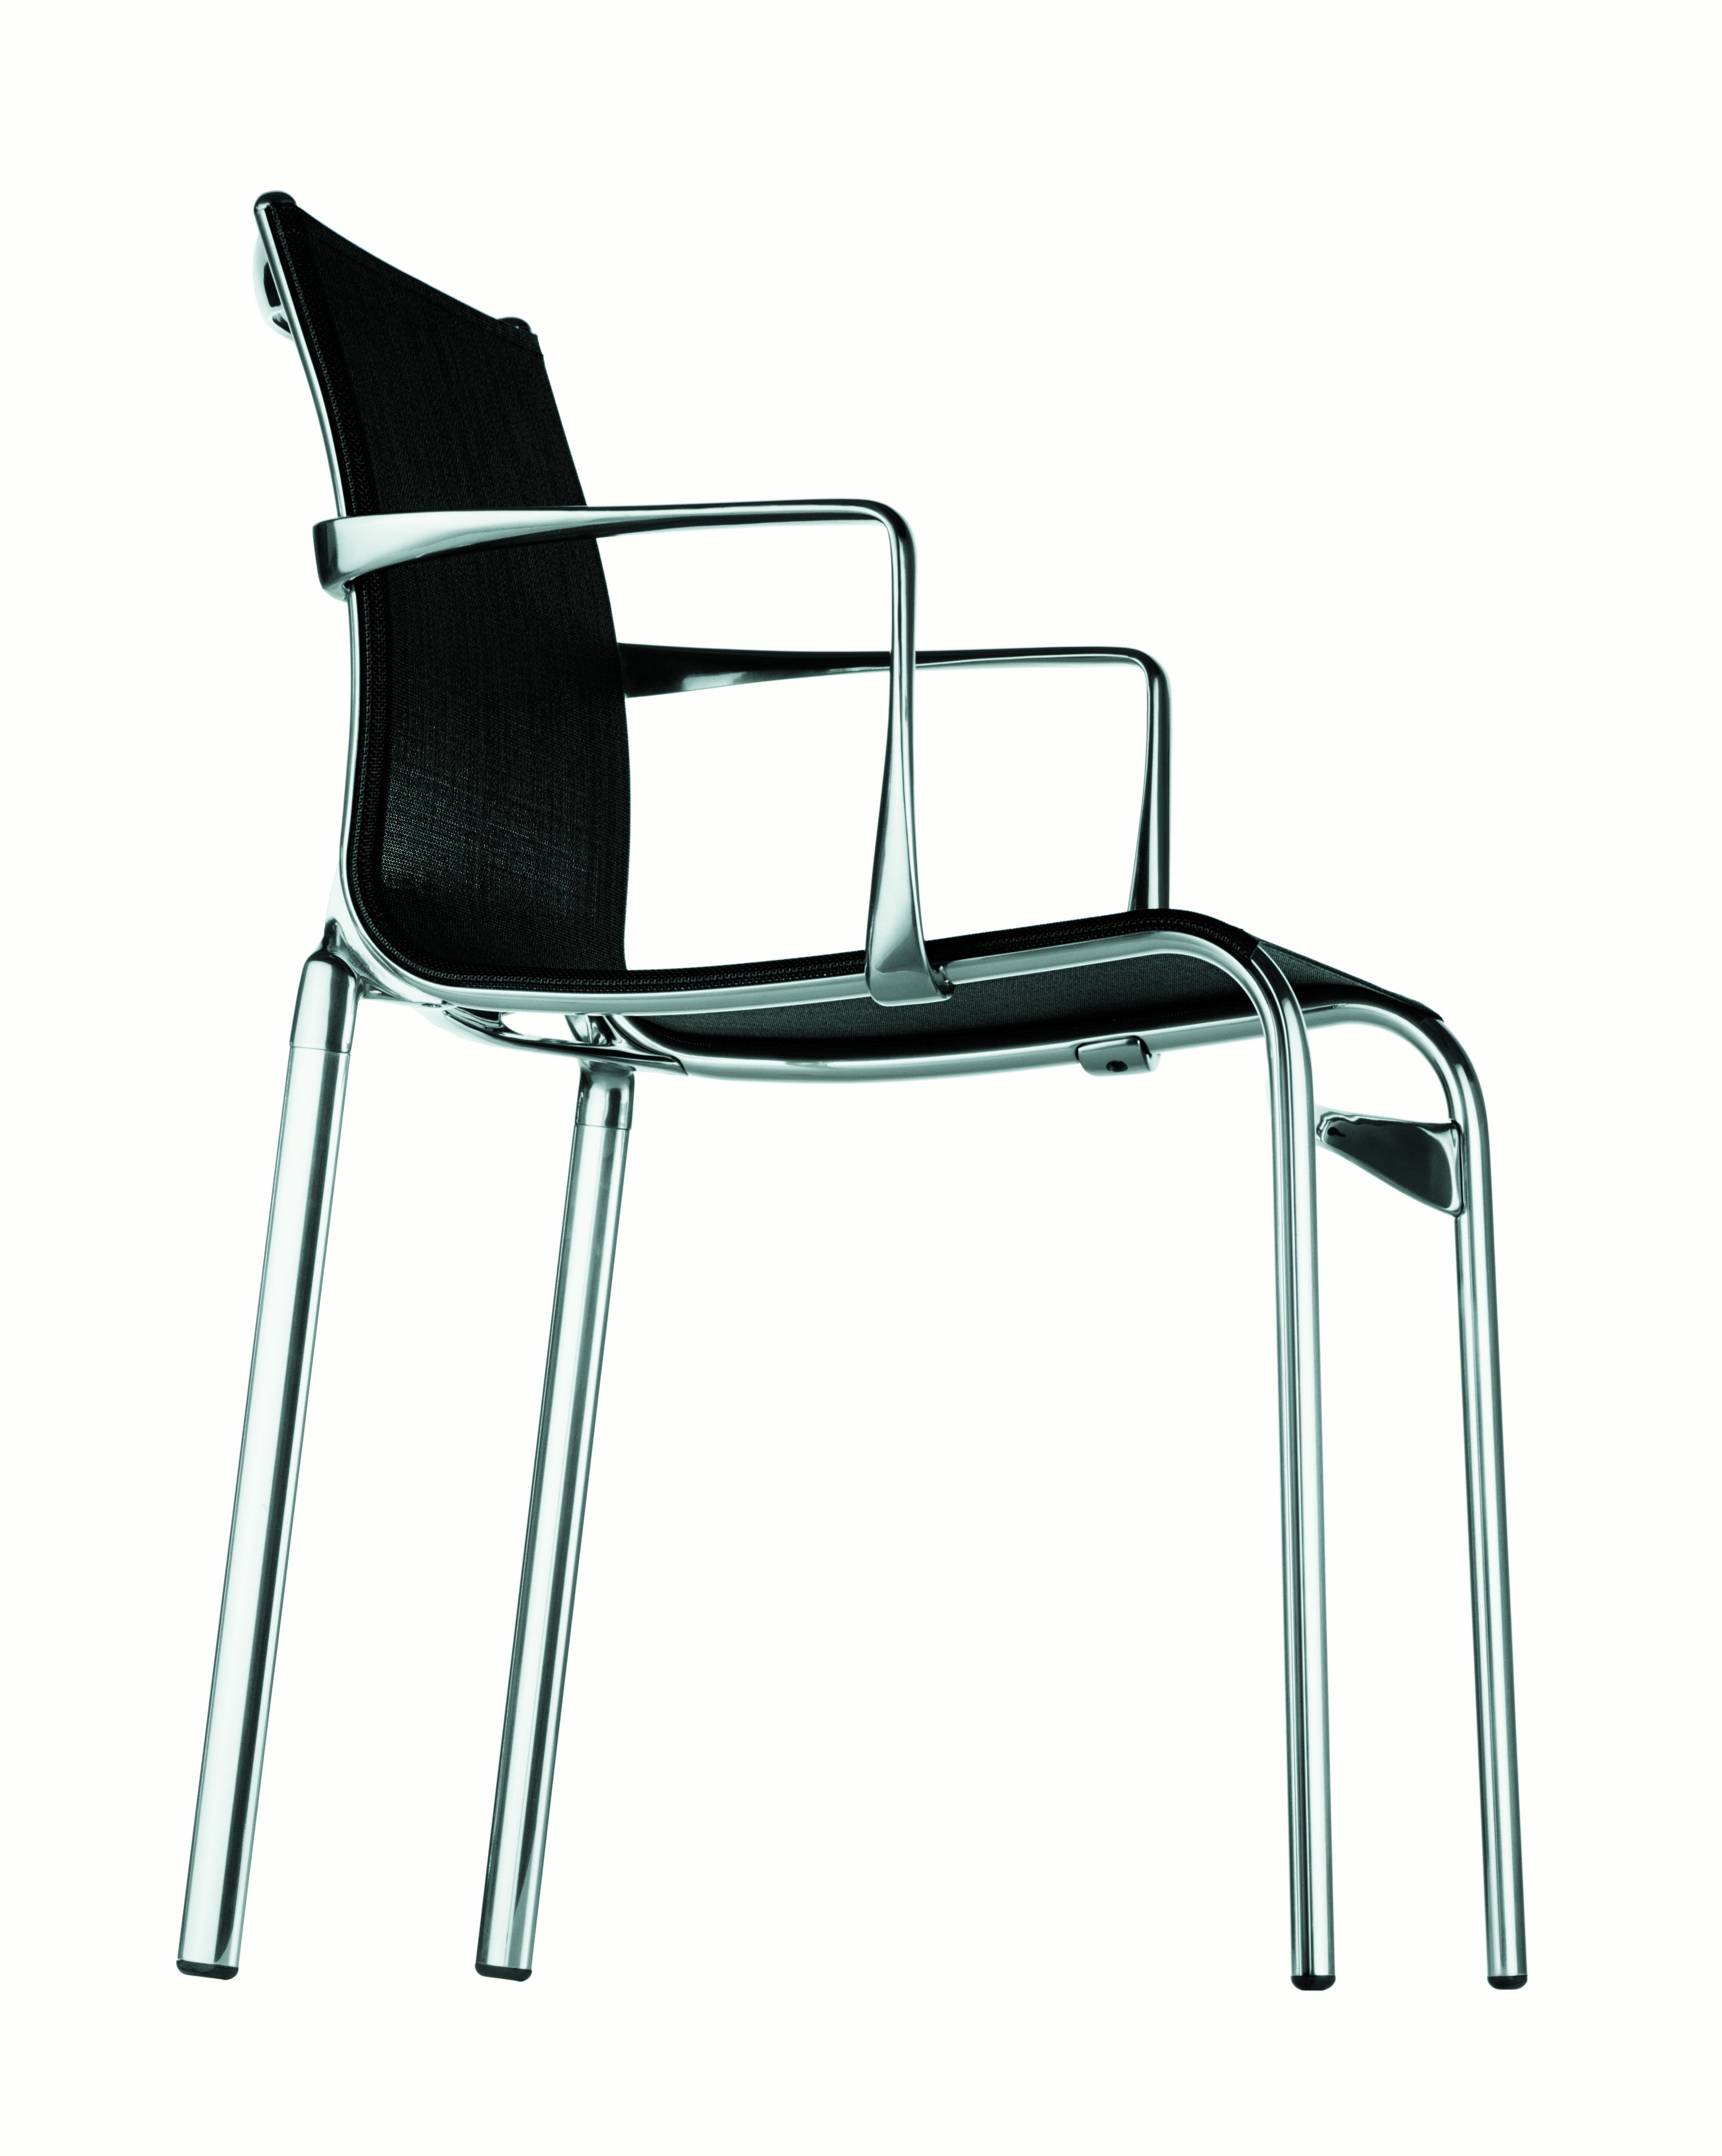 Alias 417 Highframe 40 Chair in Black Mesh Seat with Chromed Aluminium Frame by Alberto Meda

Stacking chair with arms, structure composed of extruded aluminium profile and die-cast aluminium elements. Seat and back in fire retardant PVC covered